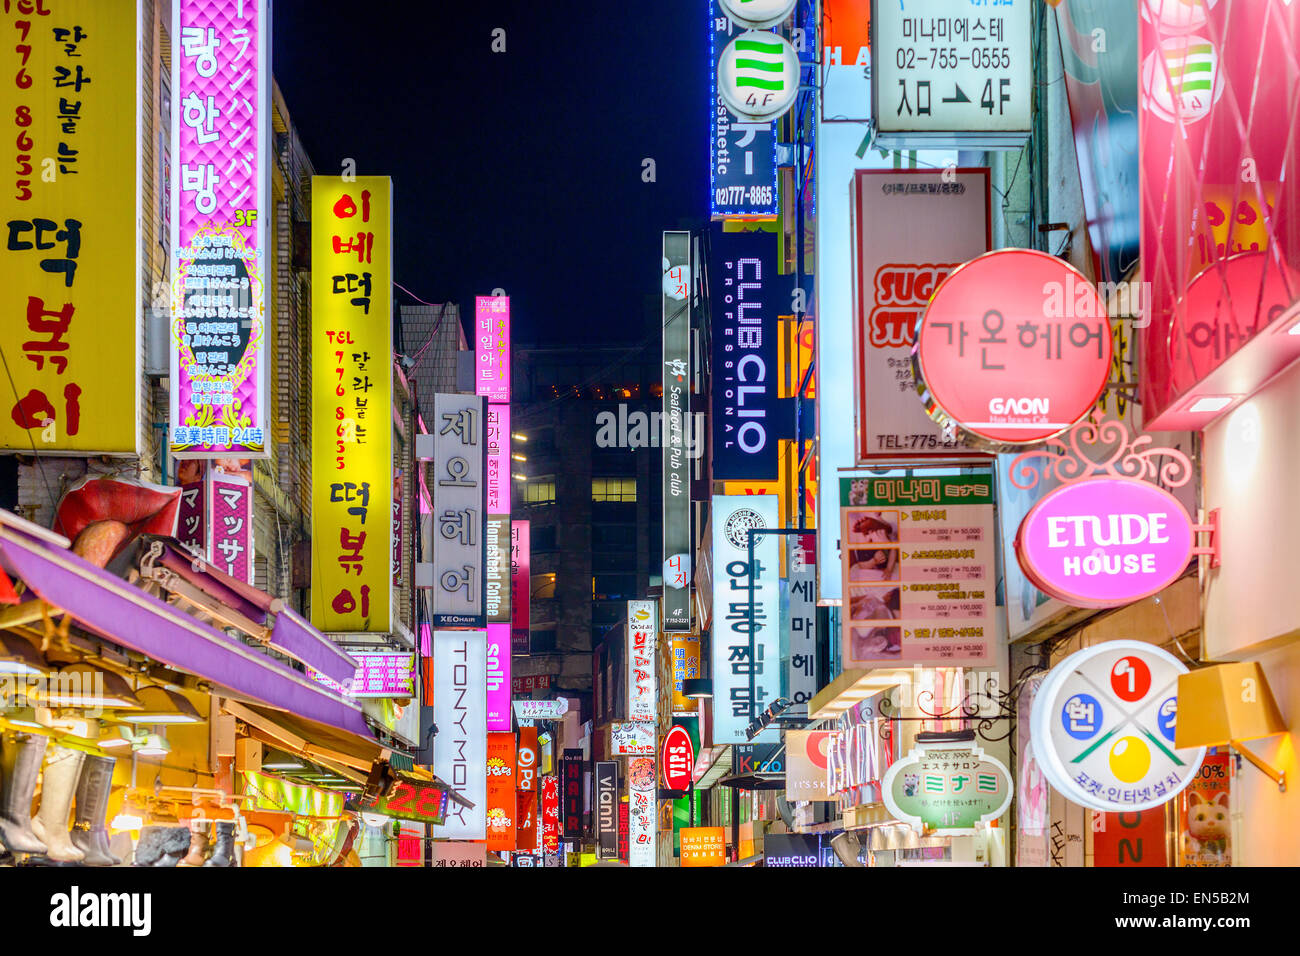 Seoul, South Korea in Myeong-Dong. The location is the premiere district for shopping in the city. Stock Photo